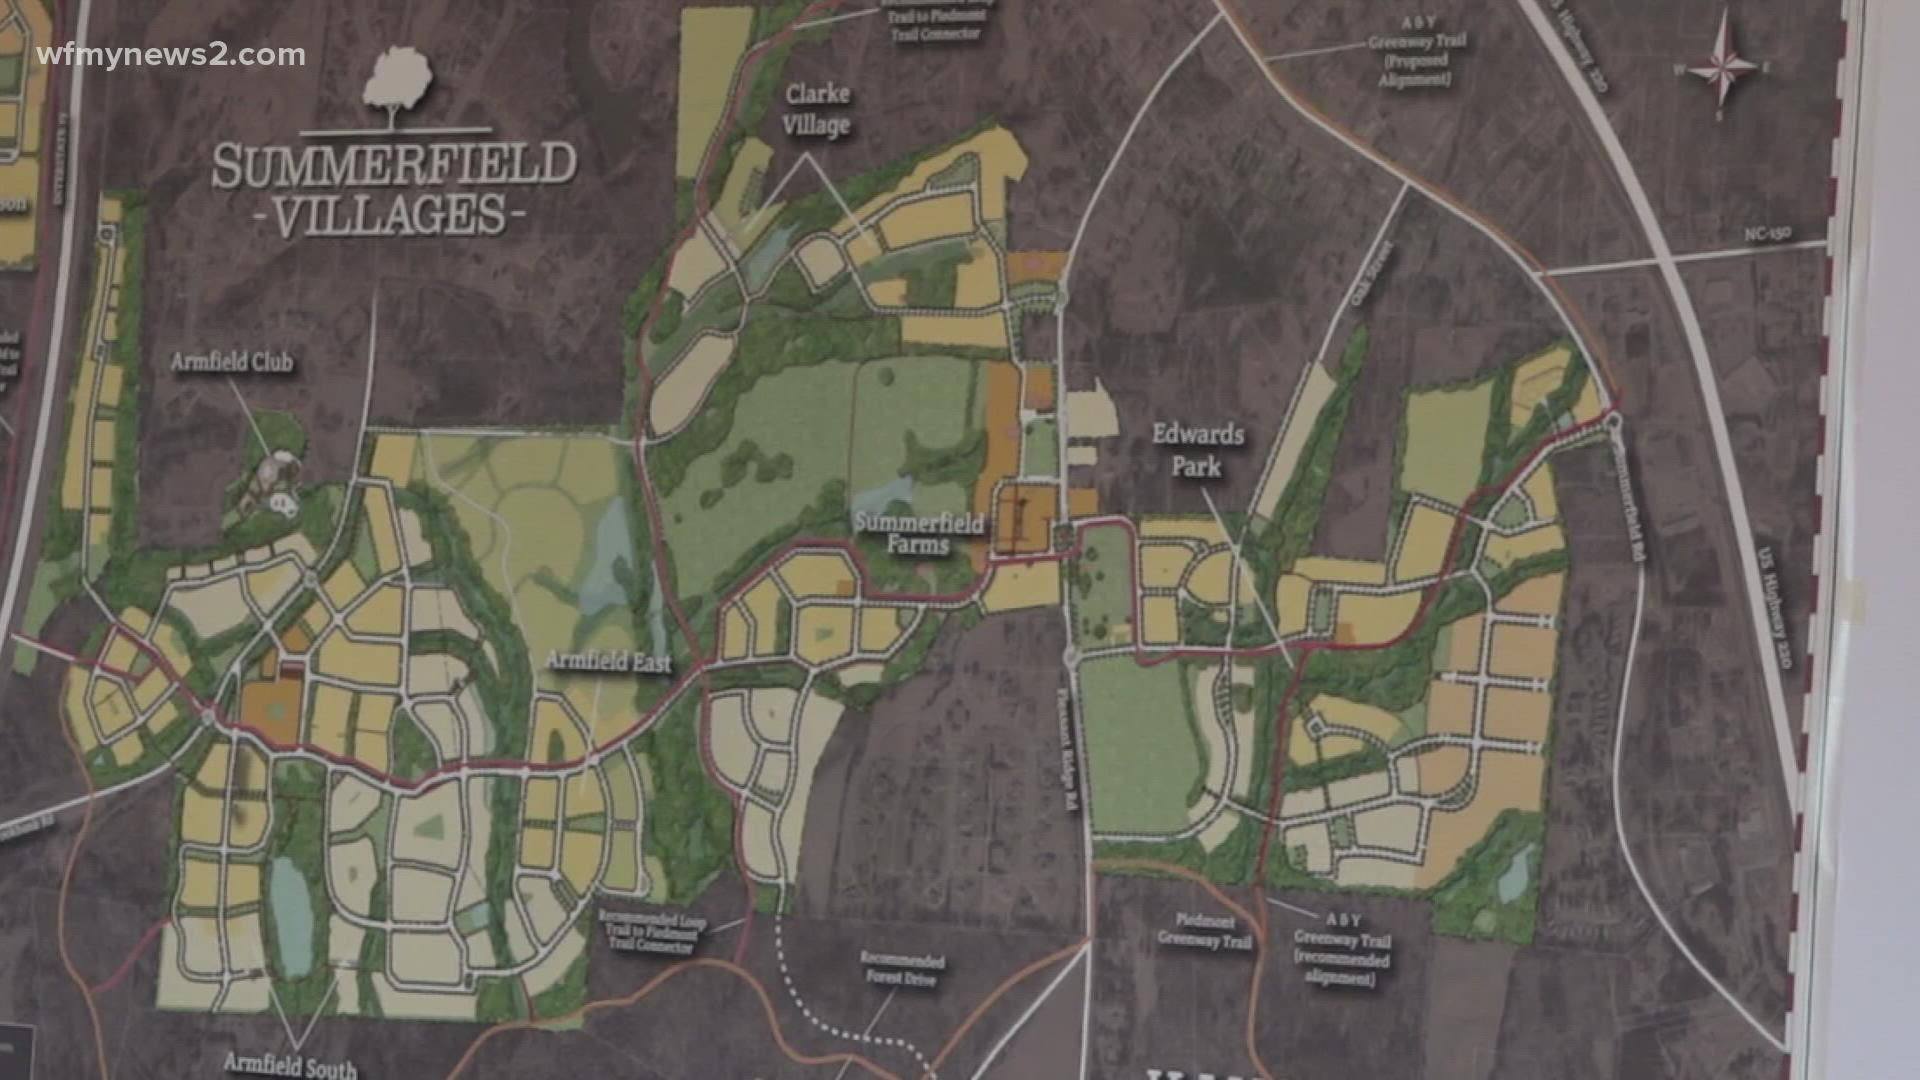 We are learning more about a plan to develop almost a thousand acres in Summerfield.